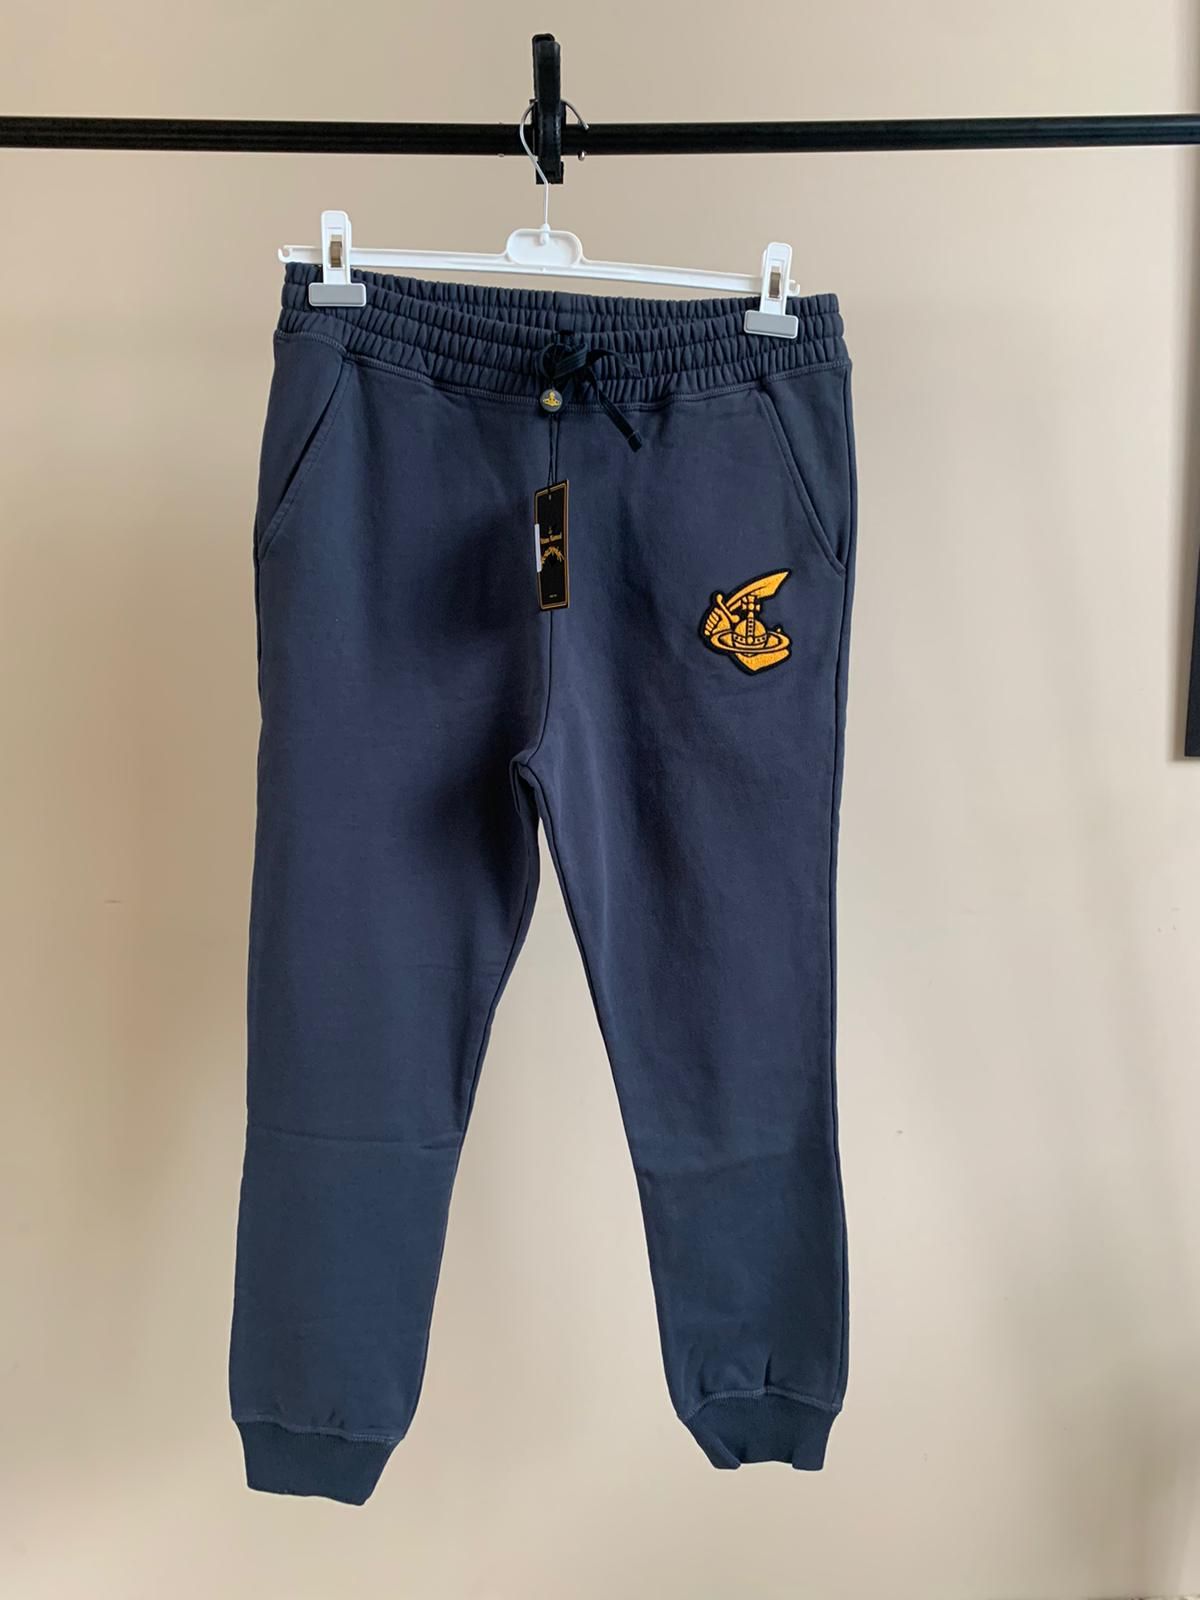 Vivienne Westwood Tracksuit Bottoms in Anthracite | Grailed